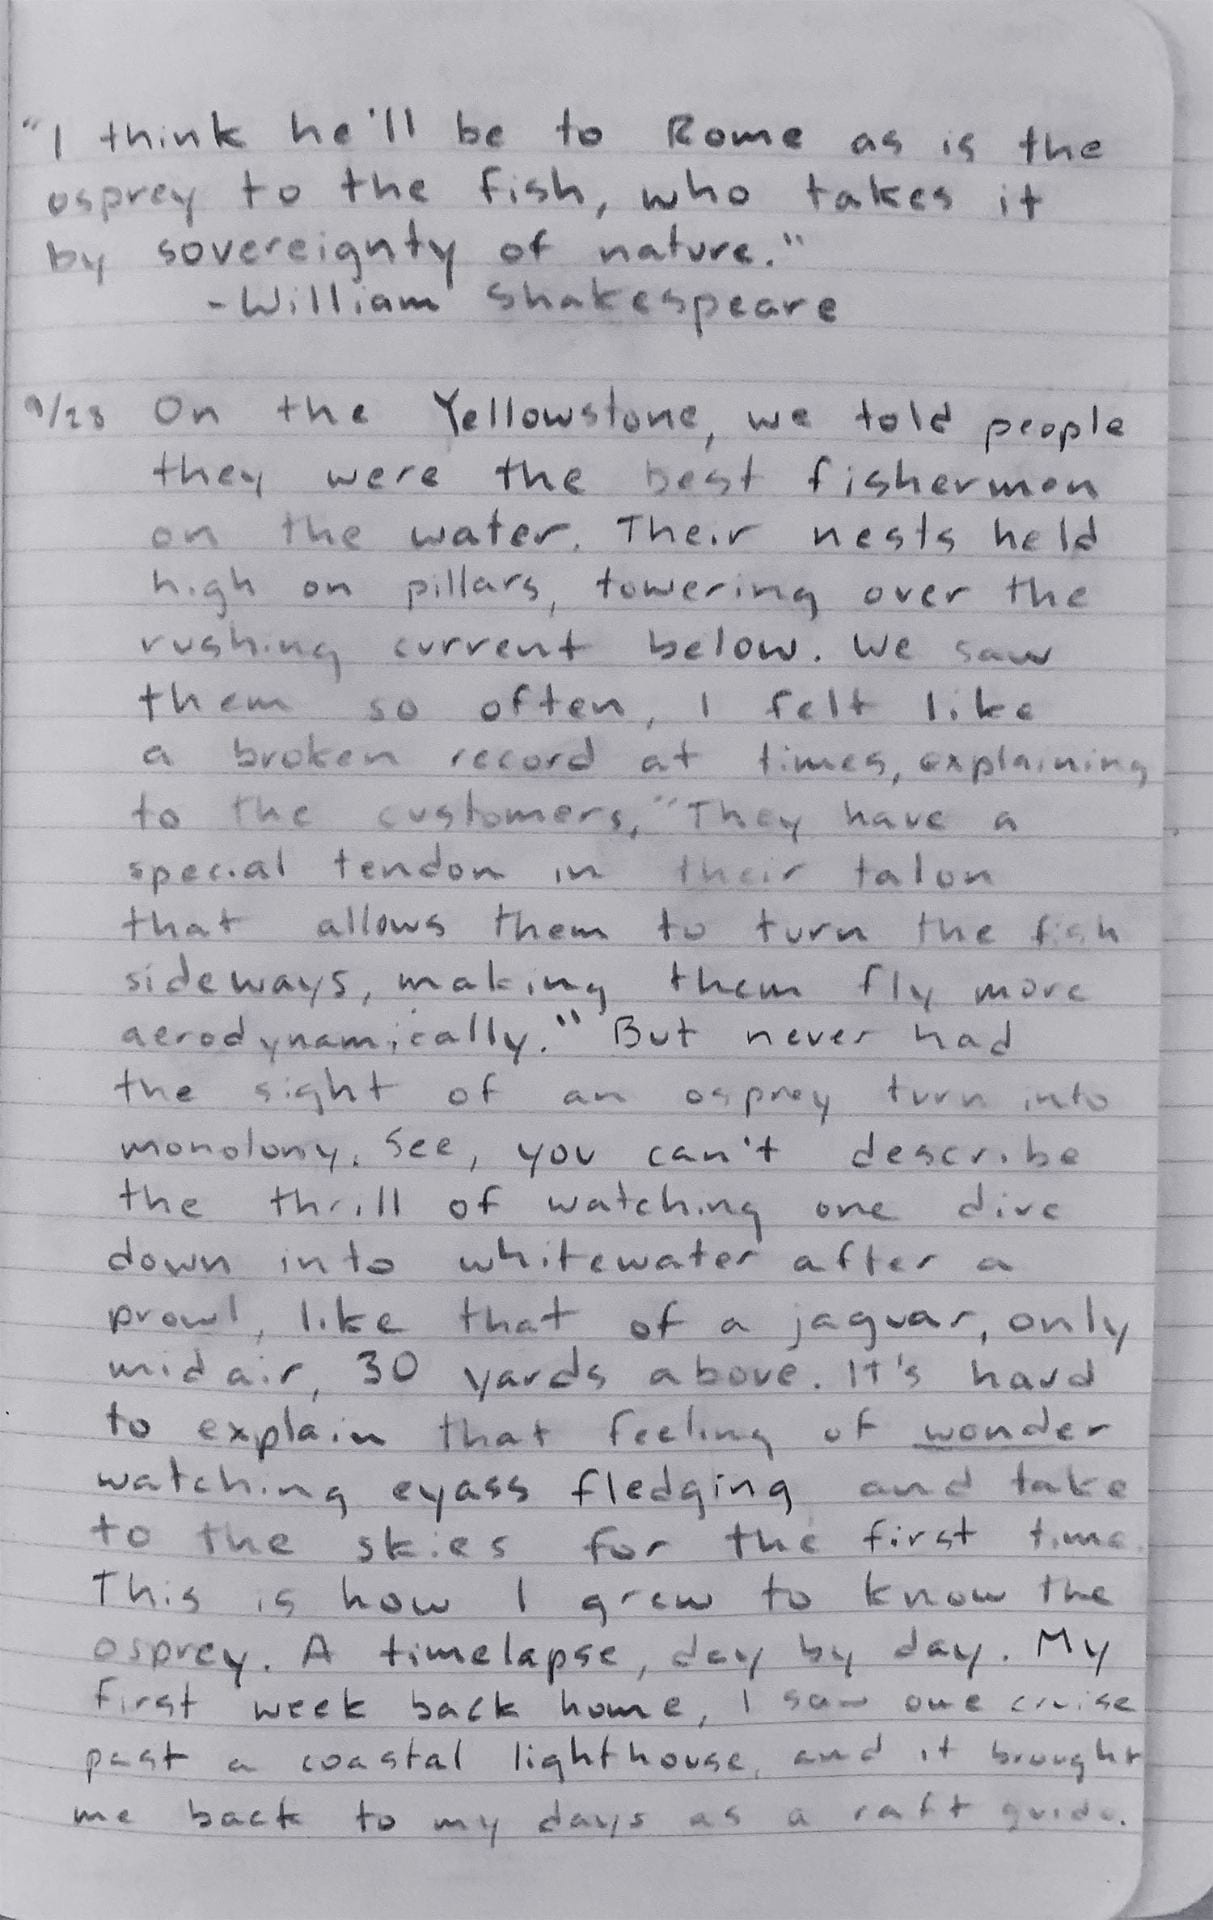 a page of handwritten notes on notepaper telling about a trip to Yellowstone and experiencing awe in seeing osprey